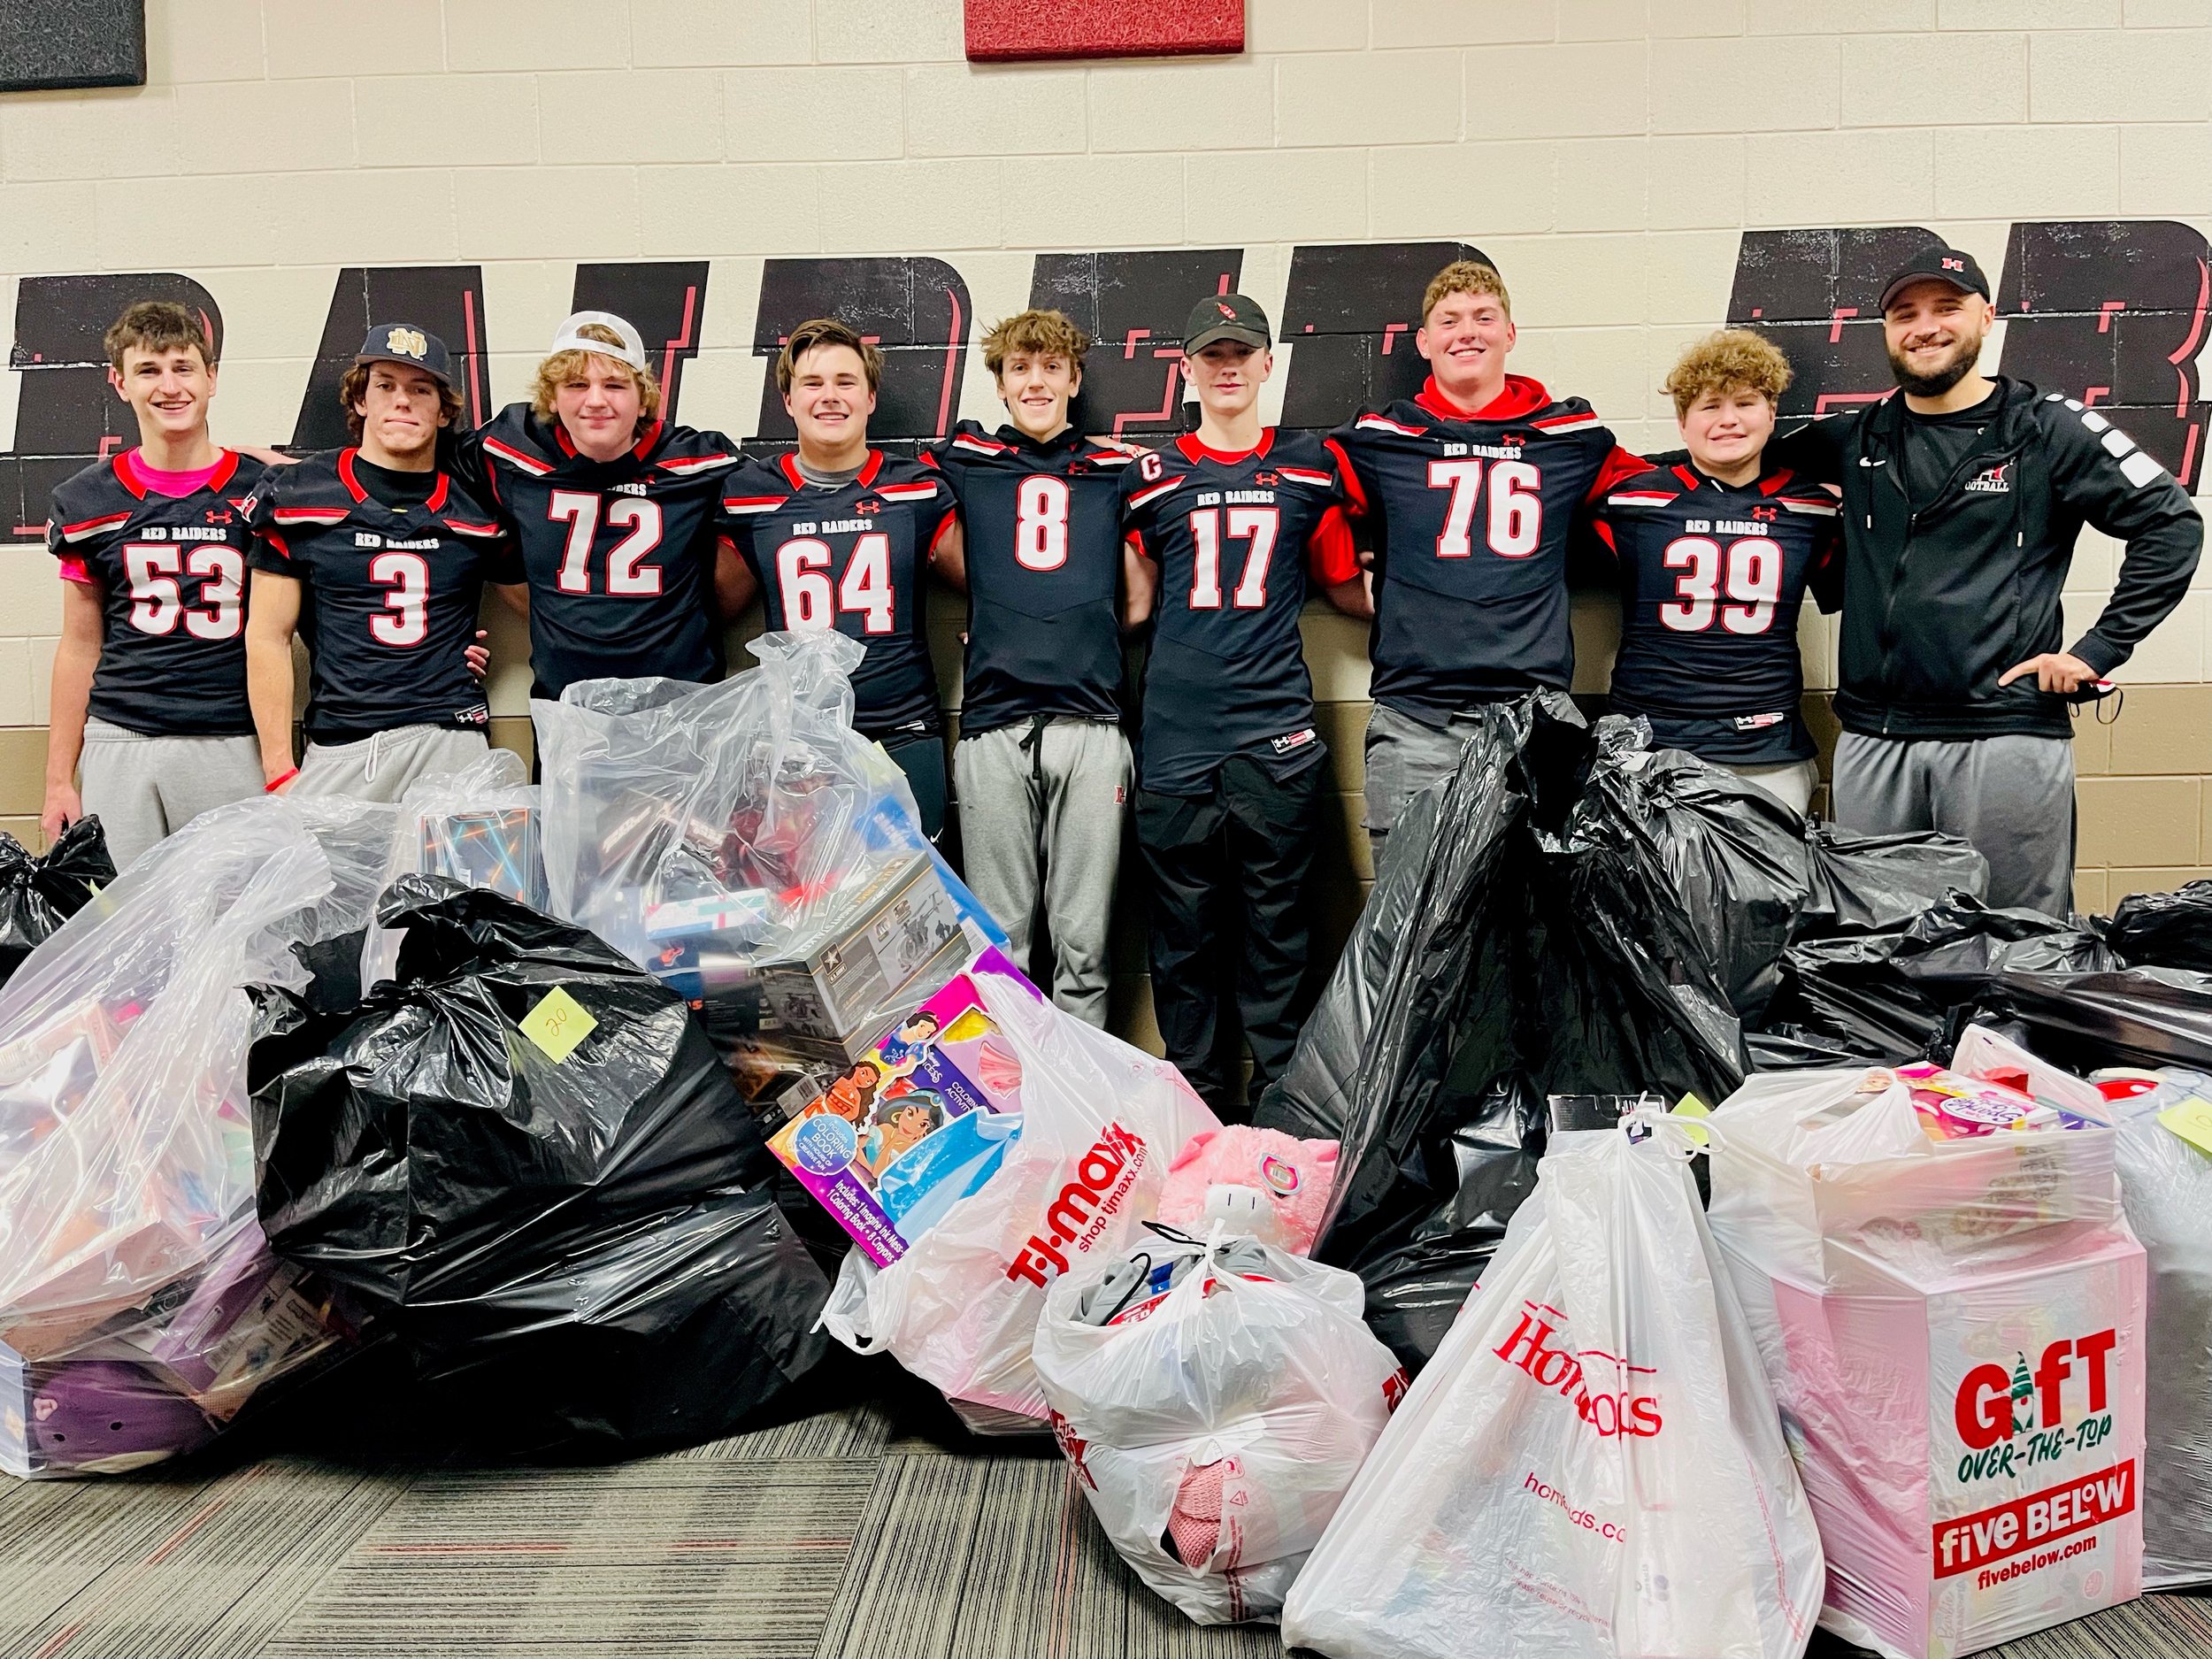 The Huntley High School football program collected 383 toys and gifts and presented them to the Grafton Food Pantry to distribute this holiday season.